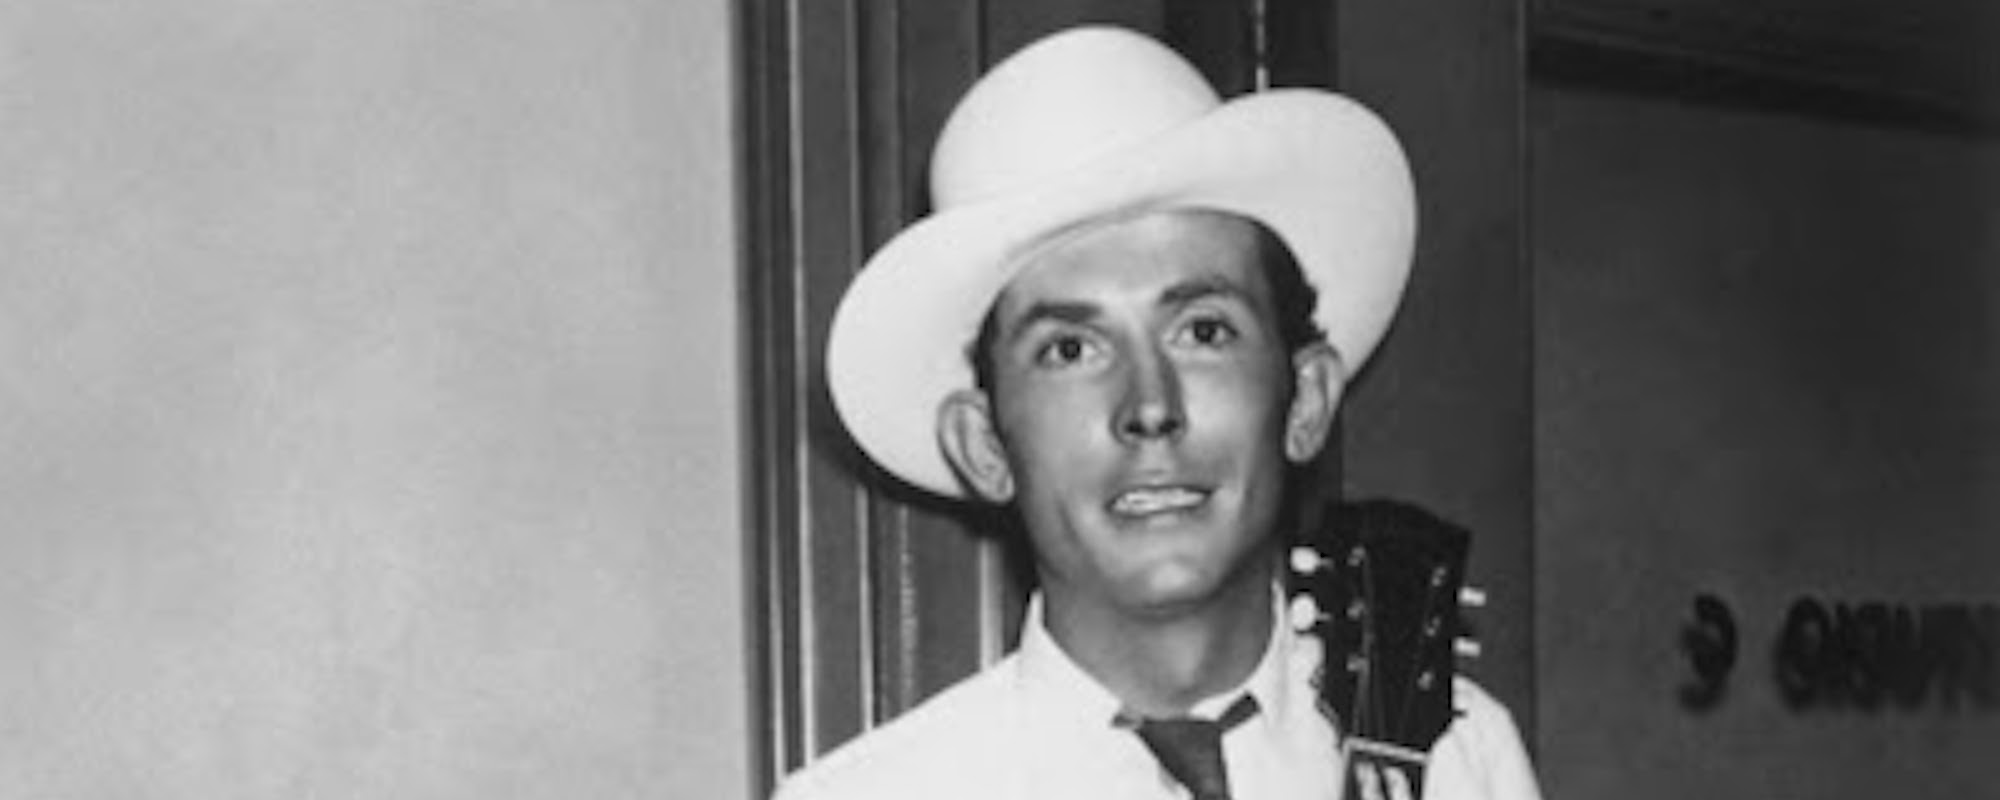 New Hank Williams Album, Hall of Fame Celebrate 100th Birthday of Late Country Legend